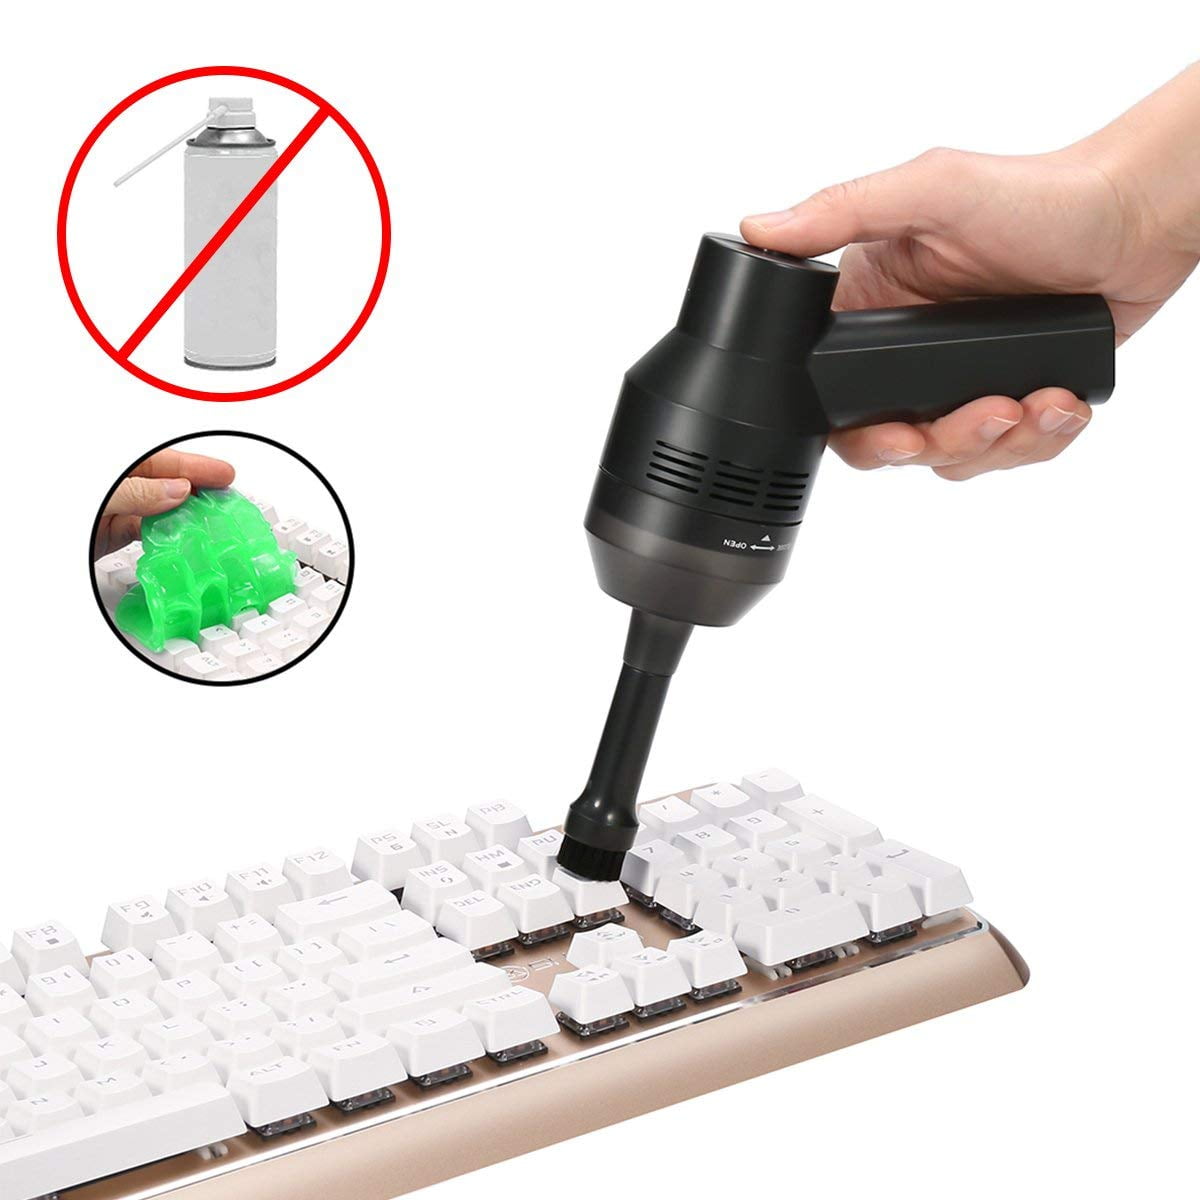 ECHTPower Keyboard Cleaner Built in Li-Battery Crumbs Powerful Rechargeable Mini Vacuum Cleaner Portable Vacuum Cleaner for PC USB Cordless Vacuum Cleaner Hairs Pet House and Laptop Scrap 